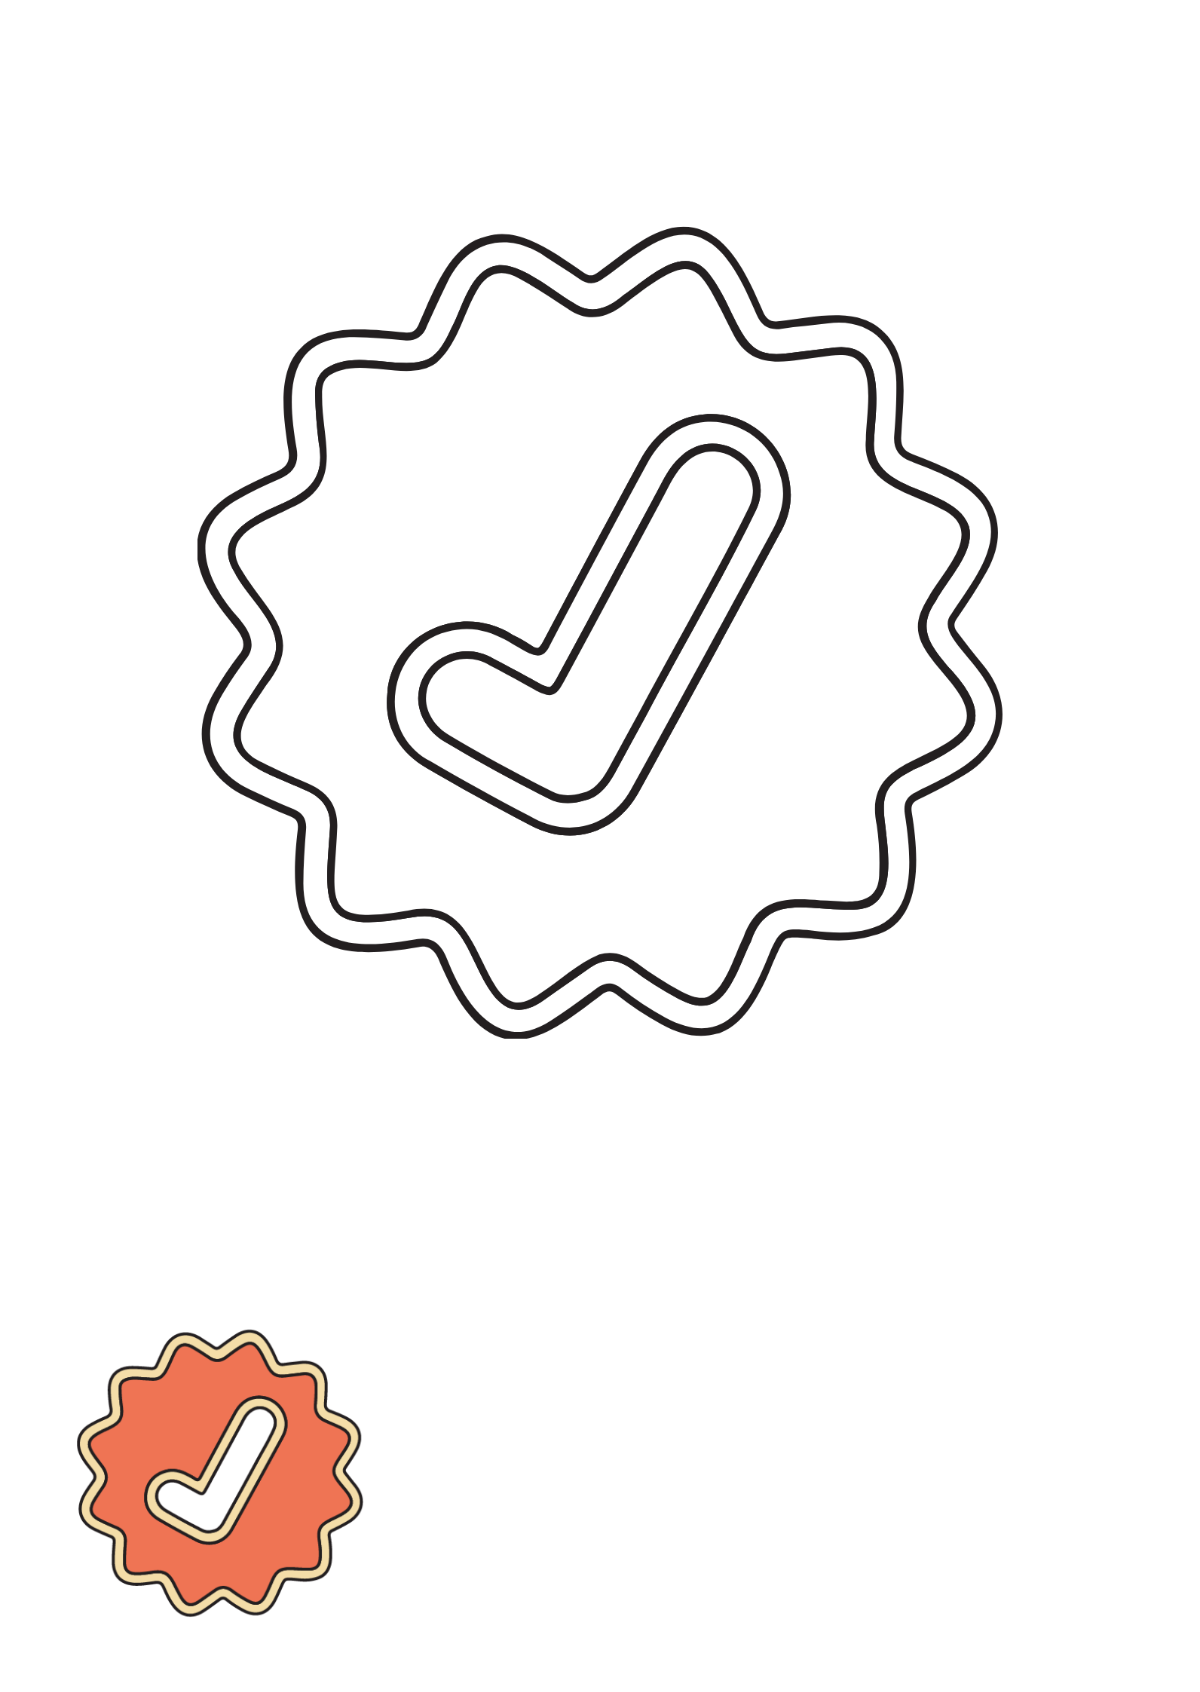 Verified Tick Mark coloring page